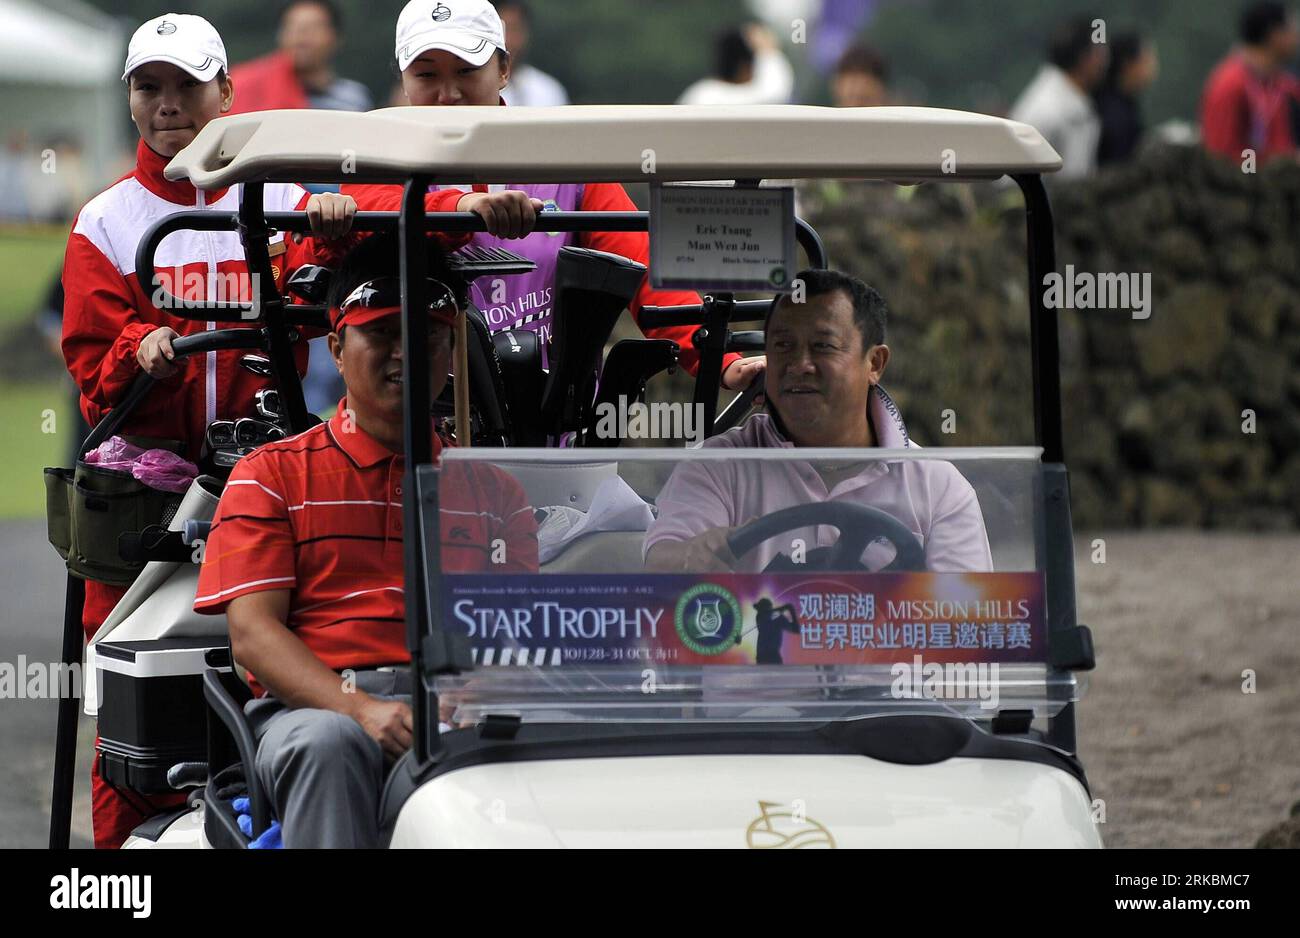 Bildnummer: 54577301  Datum: 28.10.2010  Copyright: imago/Xinhua (101028) -- HAIKOU, Oct. 28, 2010 (Xinhua) -- Chinese Hong Kong actor Eric Tsang (front, R) drives to the green during the Mission Hills Star Trophy in Haikou, south China s Hainan Province, Oct. 28, 2010. Eric Tsang and US professional golfer Rosie Jones finished first at 11-under 73 for the tournament. The Mission Hills Star Trophy is held between Oct. 28 and Oct. 31. (Xinhua/Guo Cheng)(dx) (1)CHINA-HAINAN-GOLF-STAR TROPHY(CN) PUBLICATIONxNOTxINxCHN People FIlm Entertainment Golfturnier premiumd kbdig xsk 2010 quer     Bildnumm Stock Photo